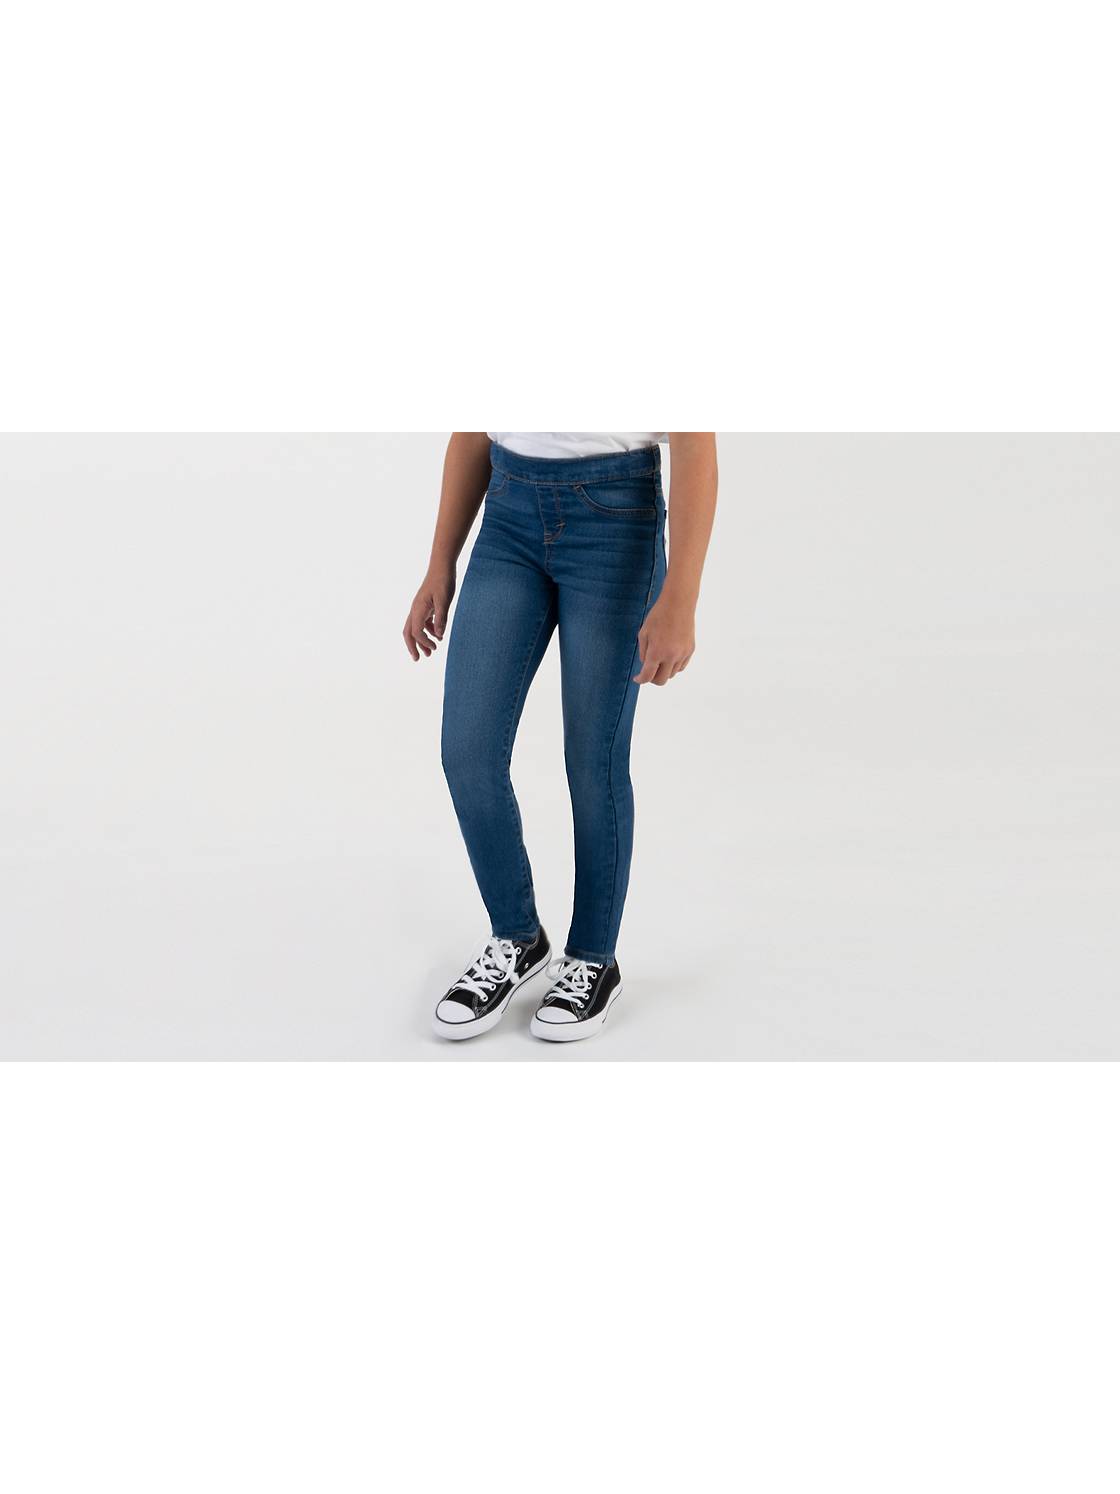 Girls' Jeans: Cool Jeggings, Skinny Jeans and More for Girls